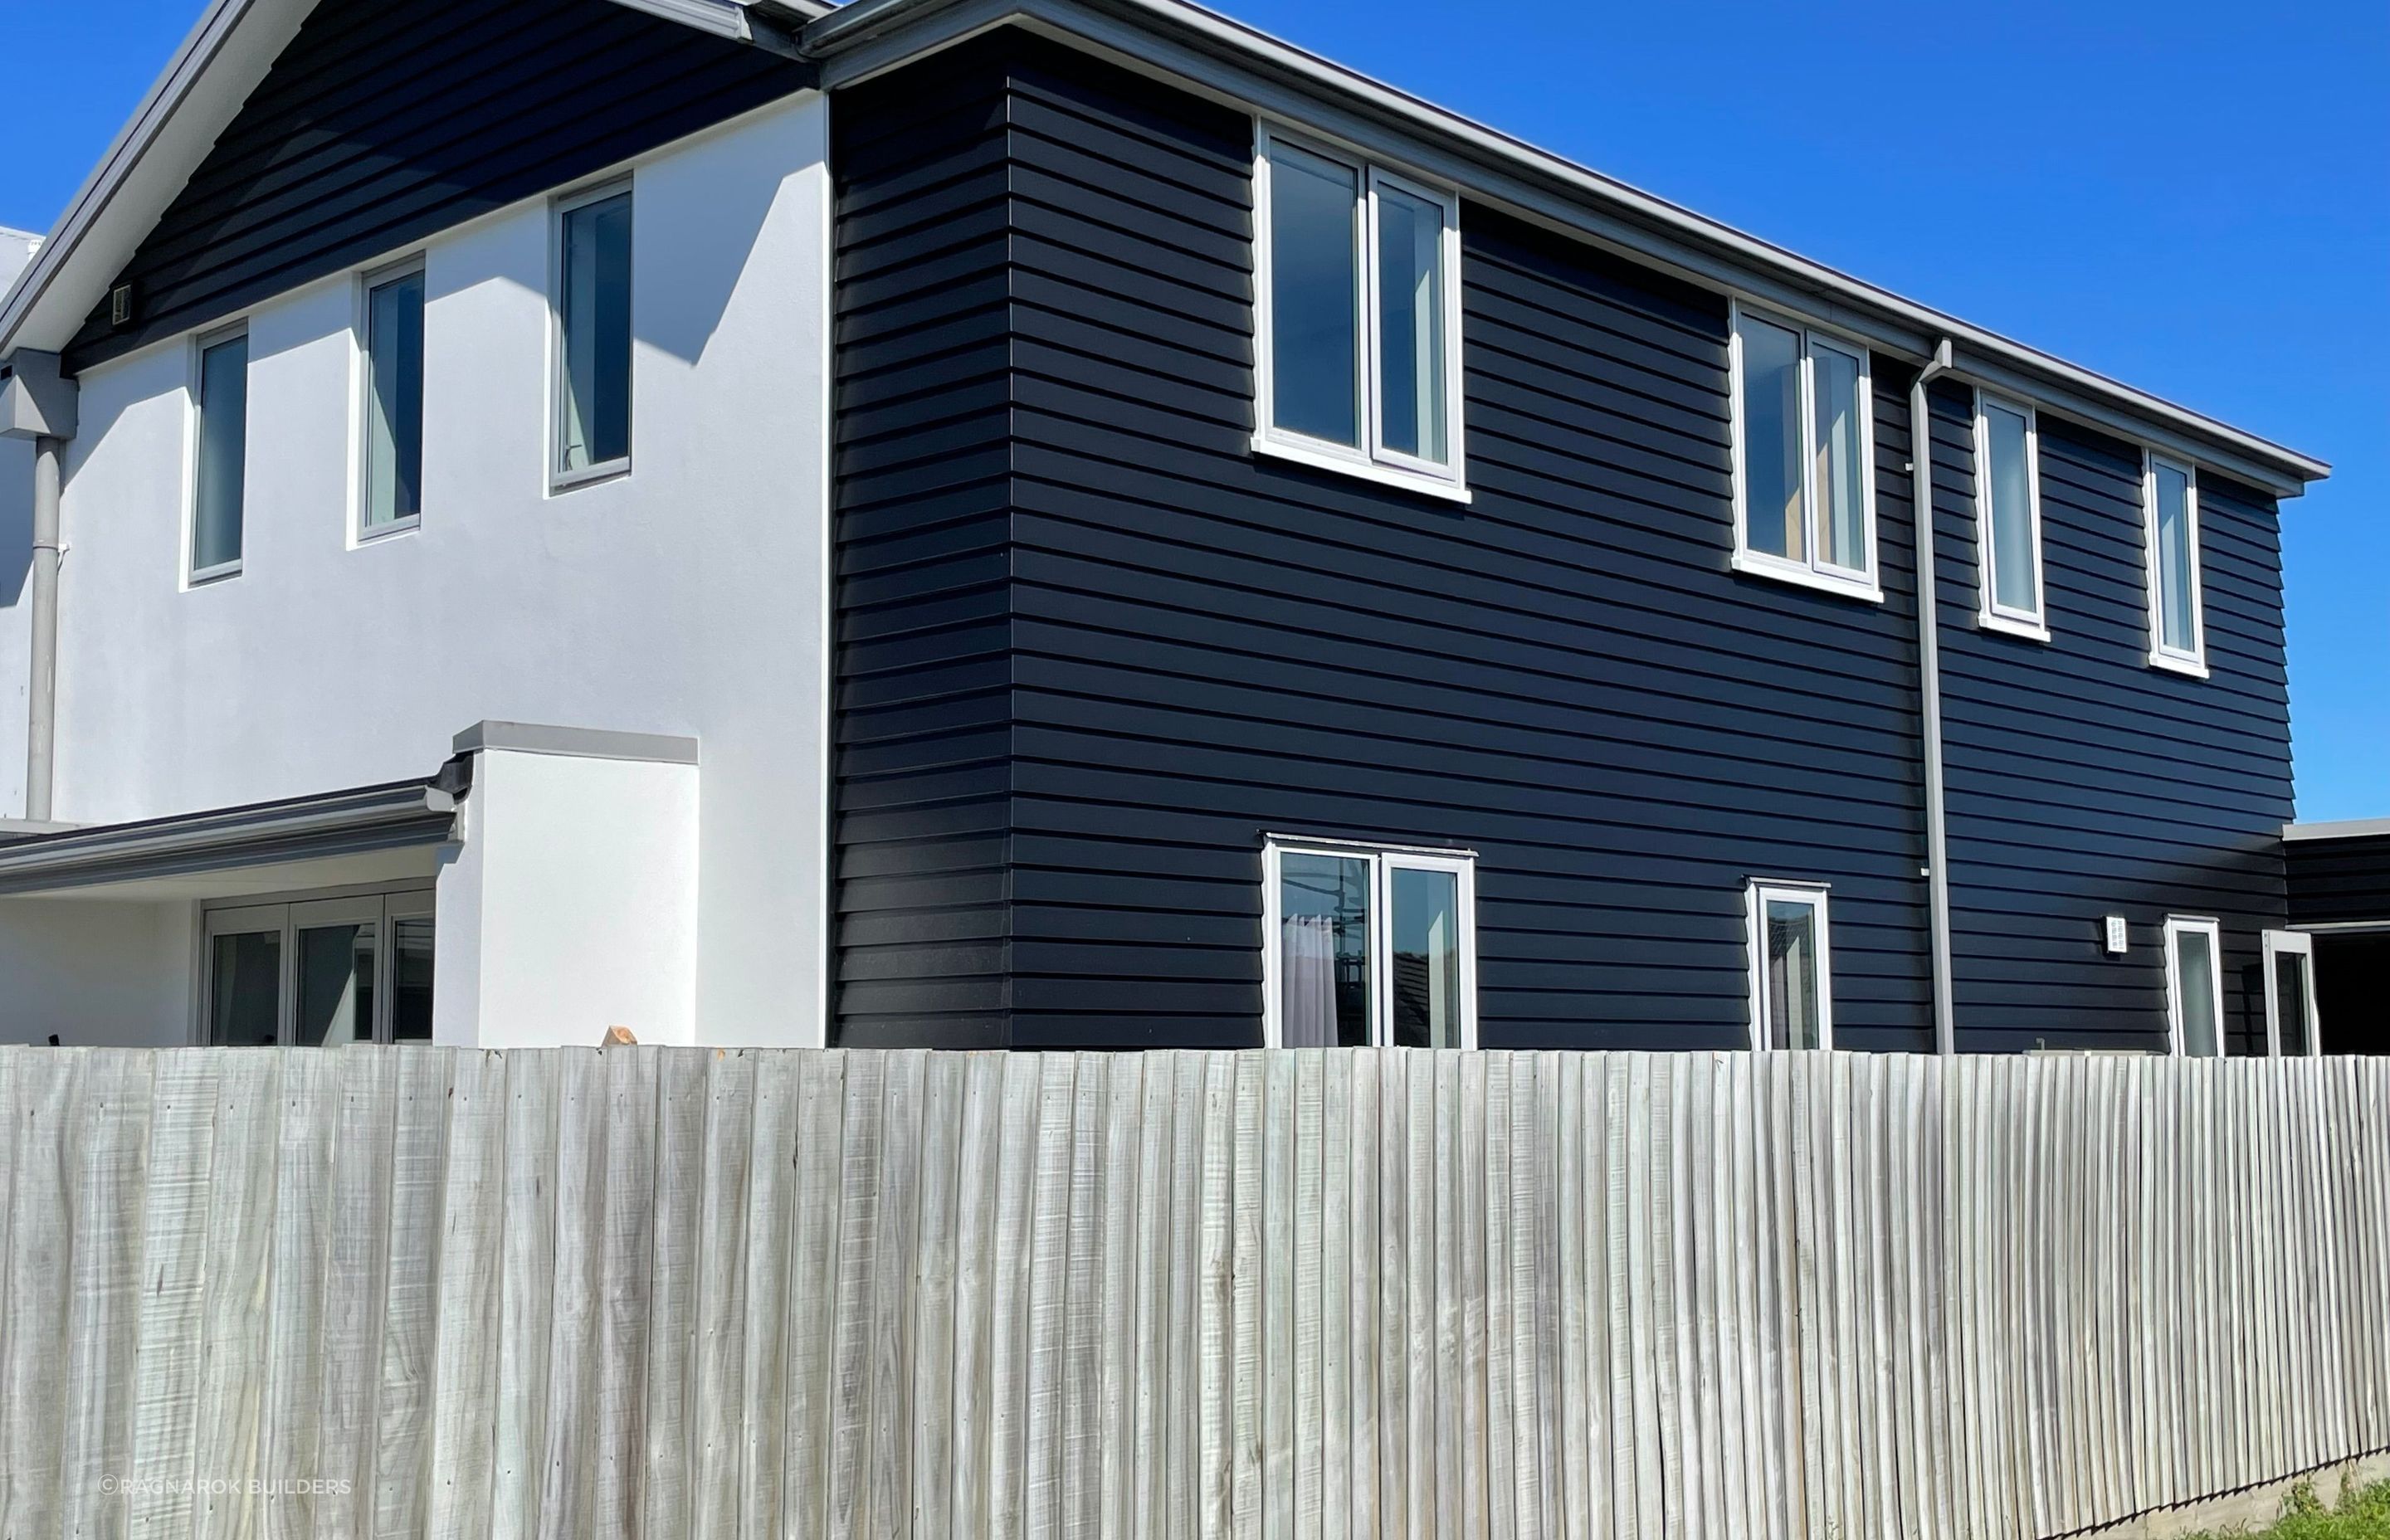 Dulux Weathershield semi gloss weatherboards, RMaxx plaster system finished in black/white